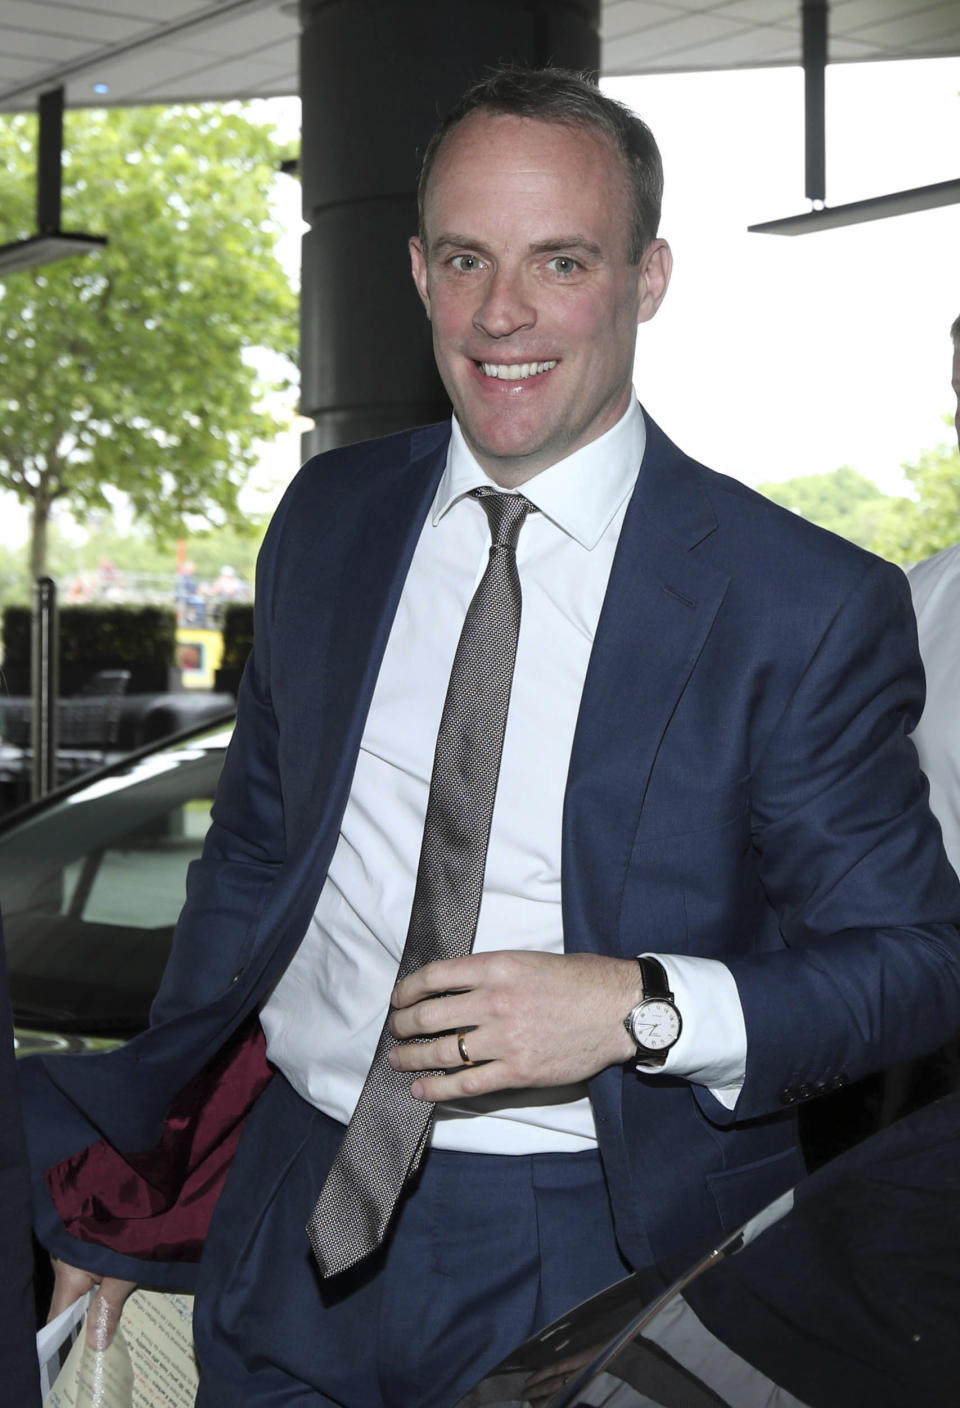 Conservative Party leadership contender Dominic Raab arrives for the Conservative National Convention meeting in central London, Saturday June 15, 2019. Britain's Conservative Party is holding elimination votes to reduce the field until the final two contenders will be put to a vote of 160,000 Conservative Party members nationwide, with the winner replacing Theresa May as party leader and prime minister, with the result due late July. (Yui Mok/PA via AP)